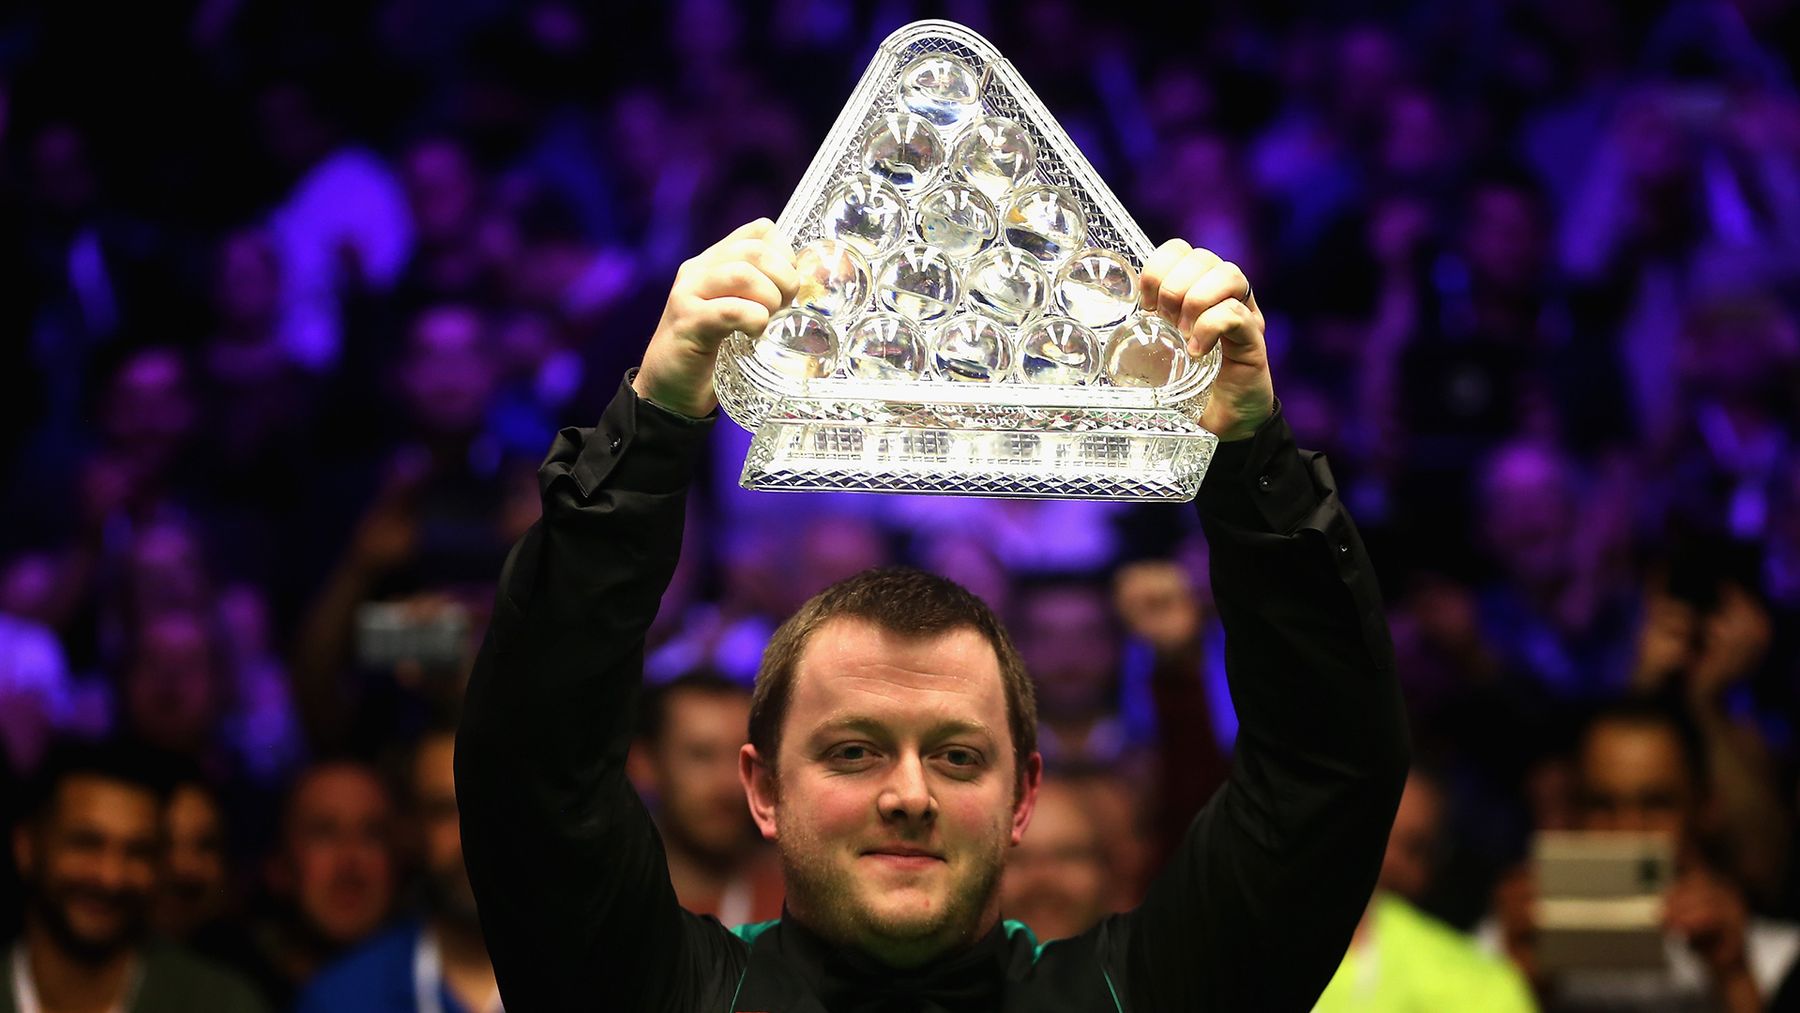 Masters Snooker 2019 Draw, schedule, betting odds, results, TV